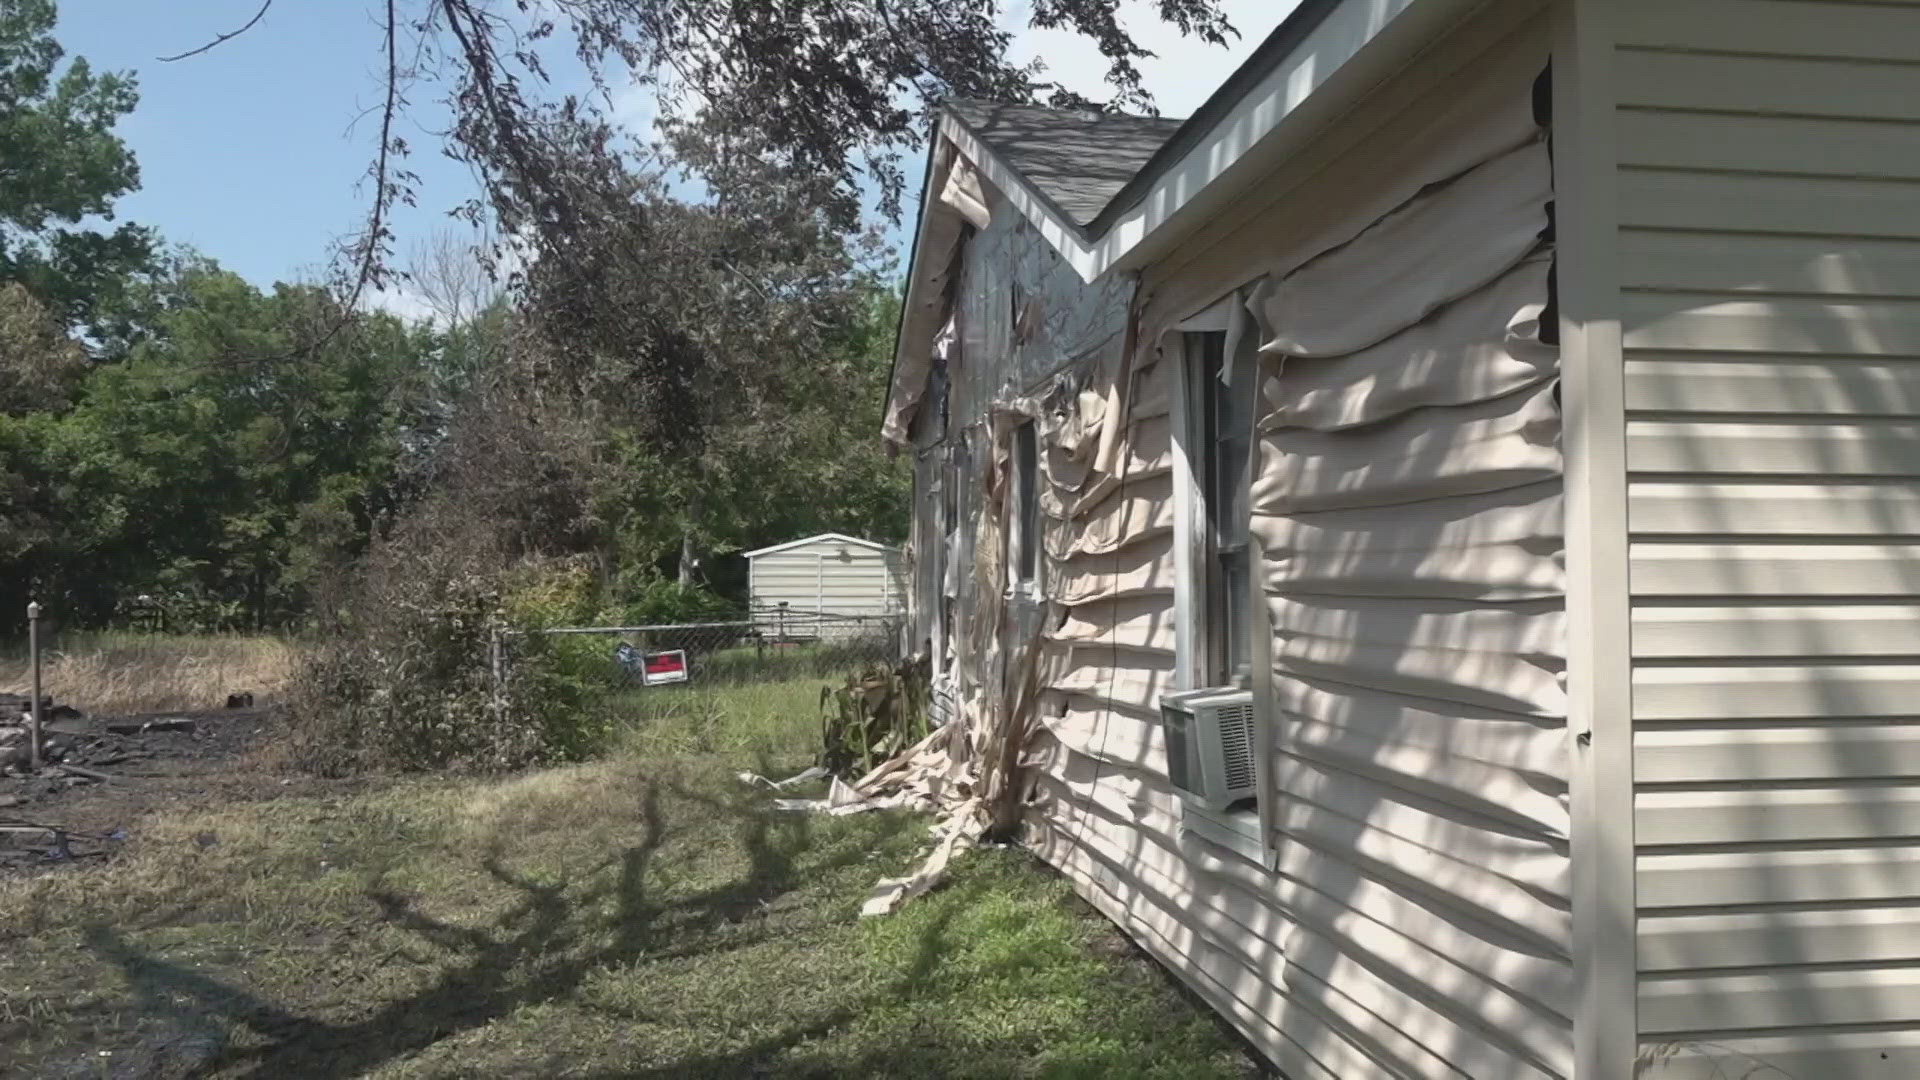 A Lacy Lakeview couple said their home was damaged after a fire department training exercise on an abandoned home next to theirs.